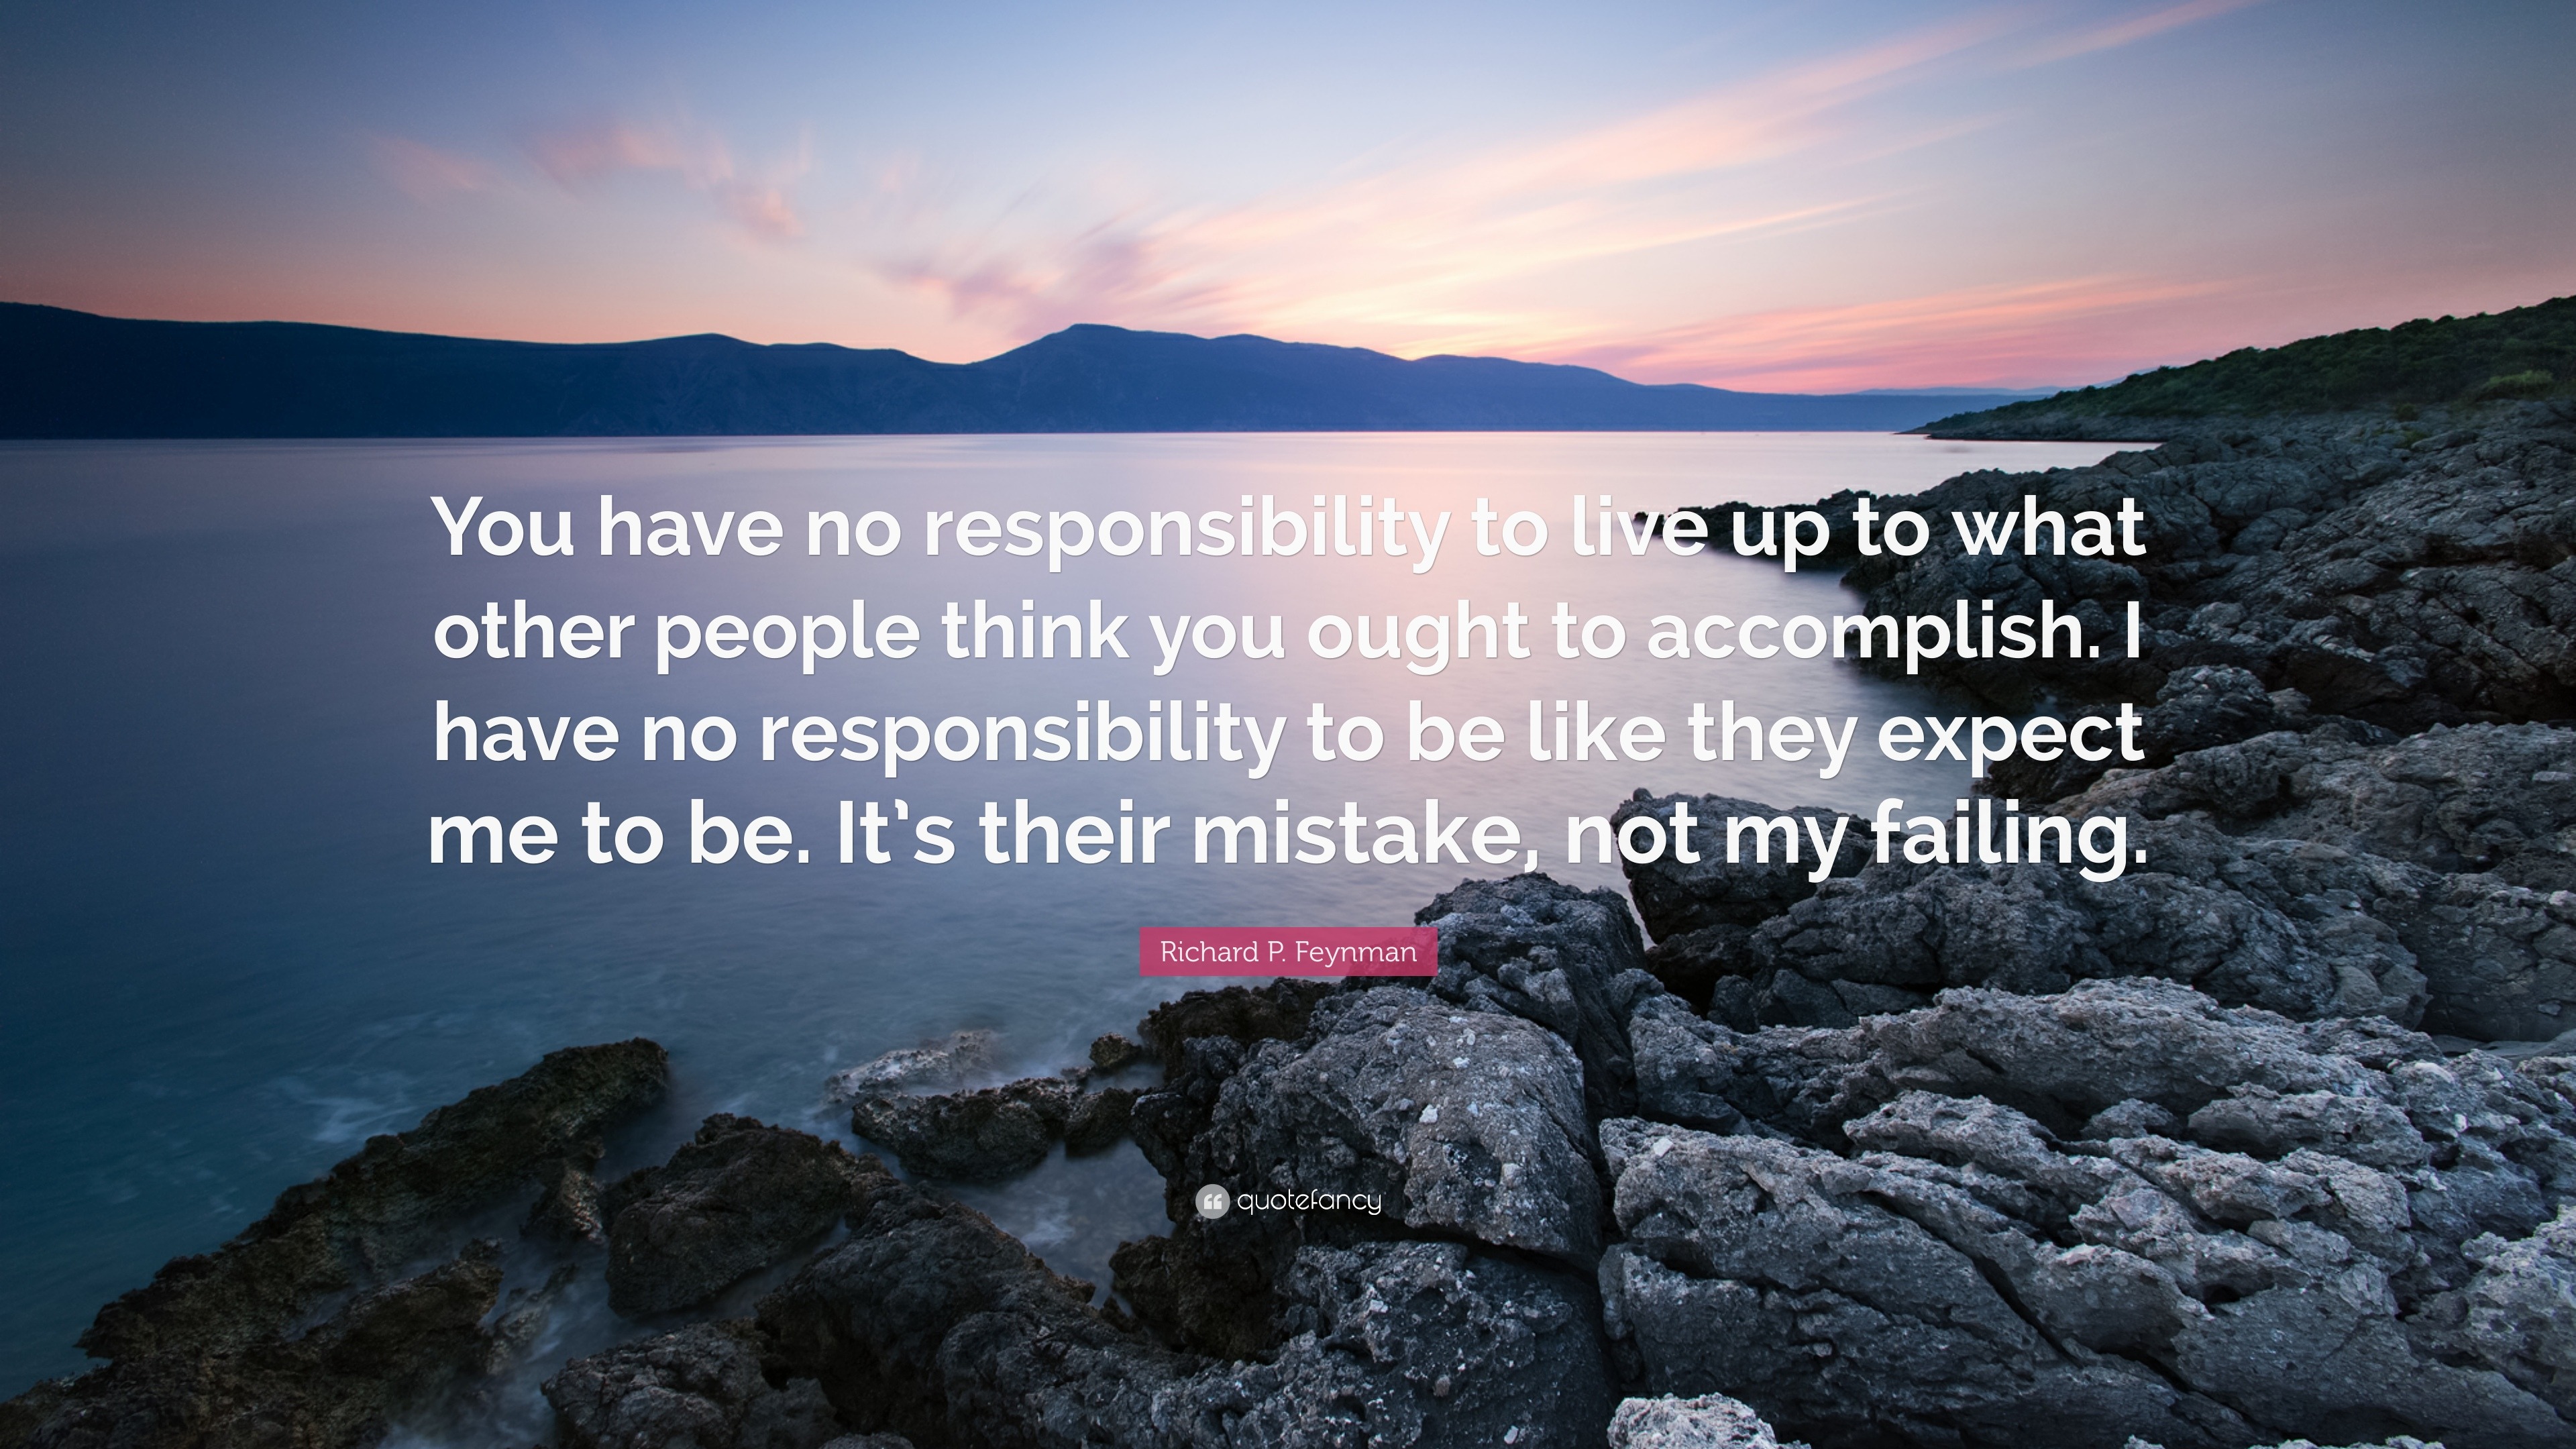 Richard P. Feynman Quote: “You have no responsibility to live up to what other  people think you ought to accomplish. I have no responsibility to be...”